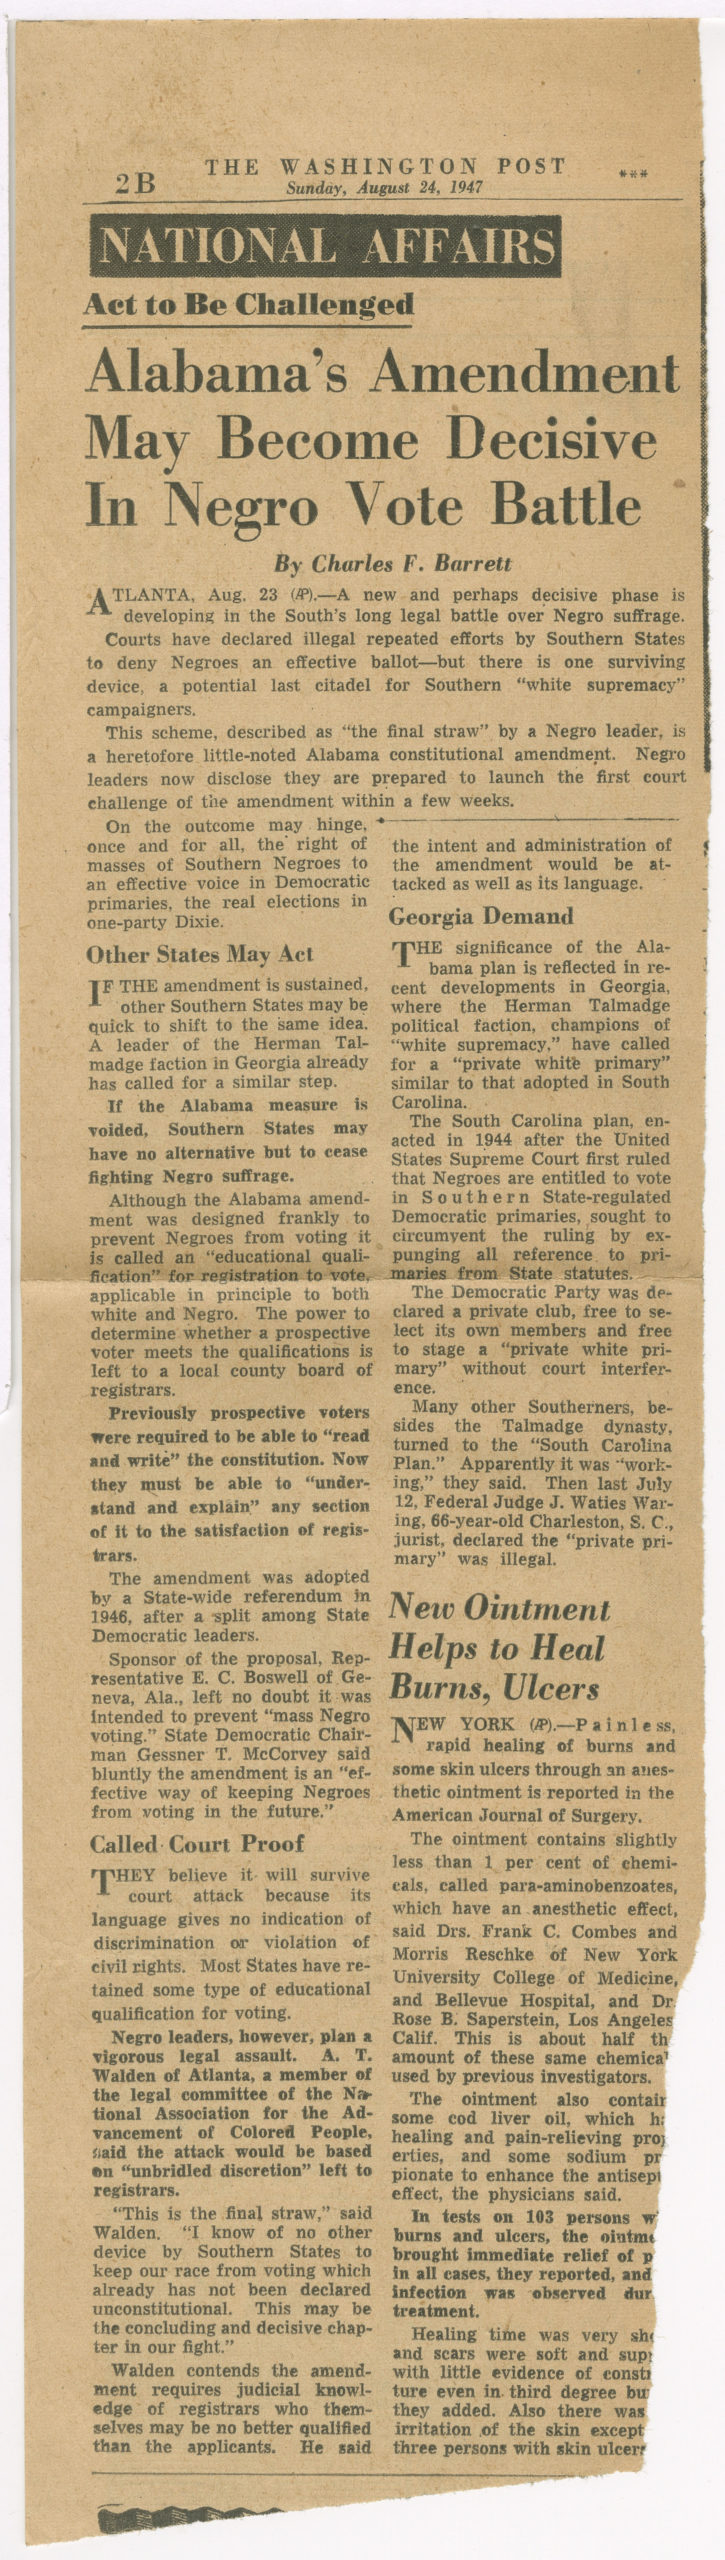 Alabama's Amendment May Become Decisive In Negro Vote Battle,Washington Post,1947 August 24,Johnson Publishing Company Clippings File Collection